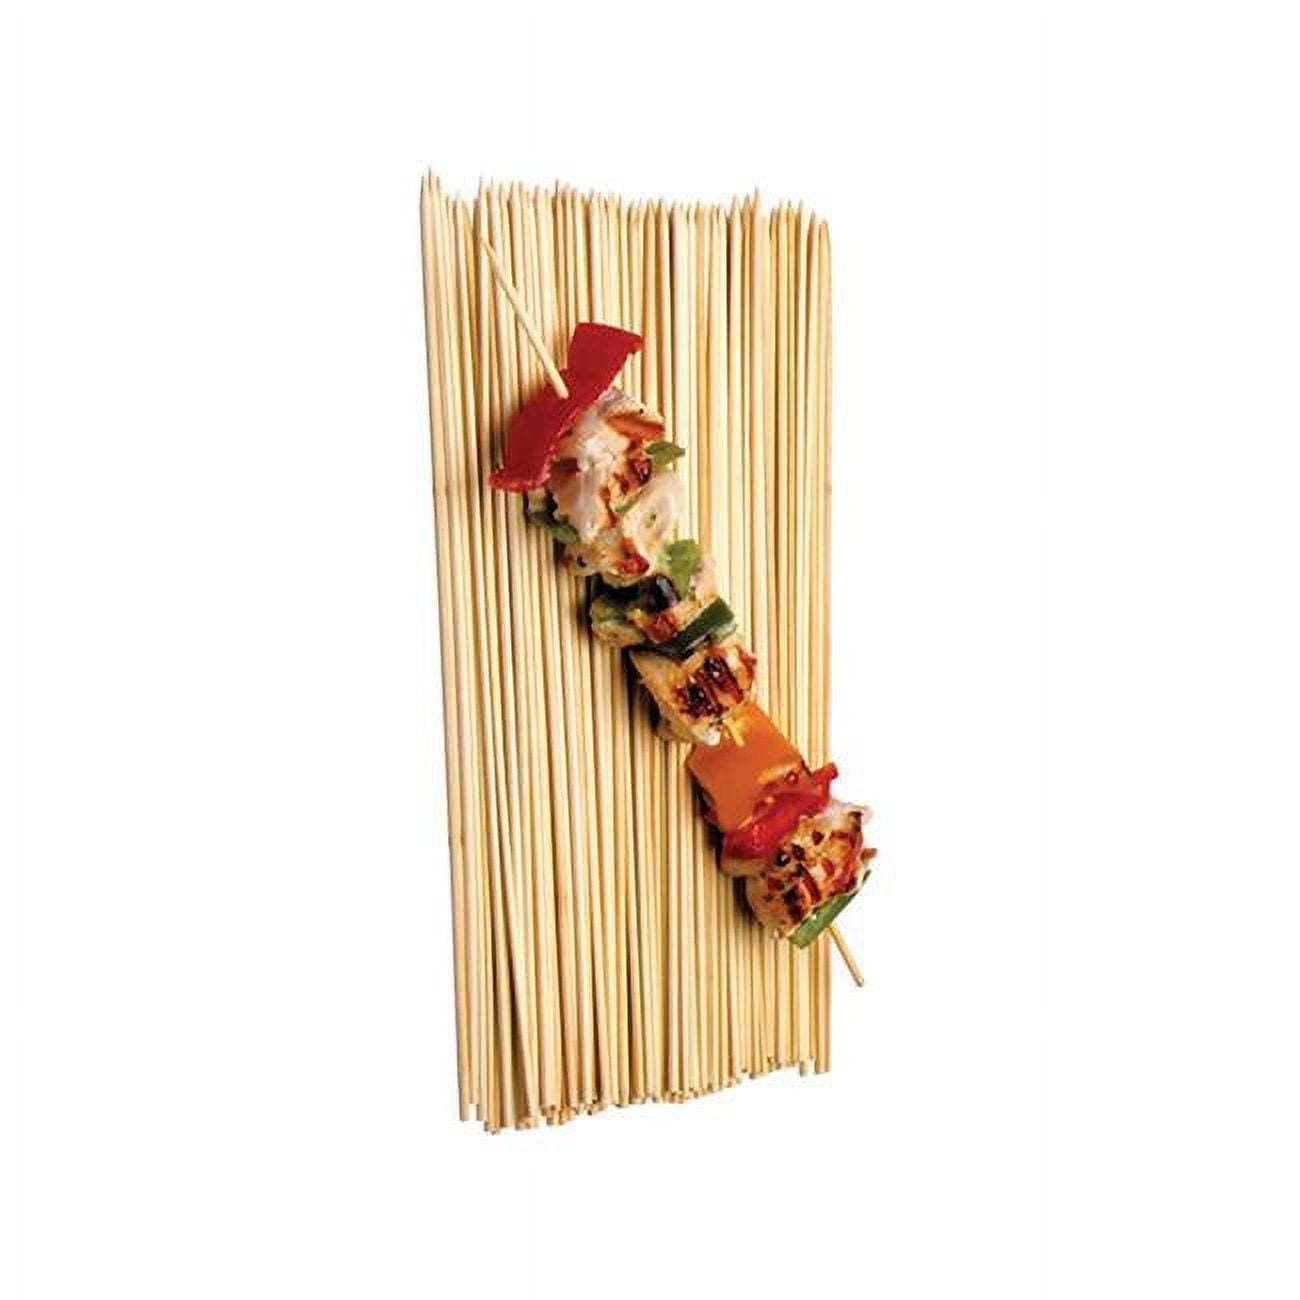 Picture of Norpro 6339980 12 in. Brown Bamboo Skewers - 100 Piece